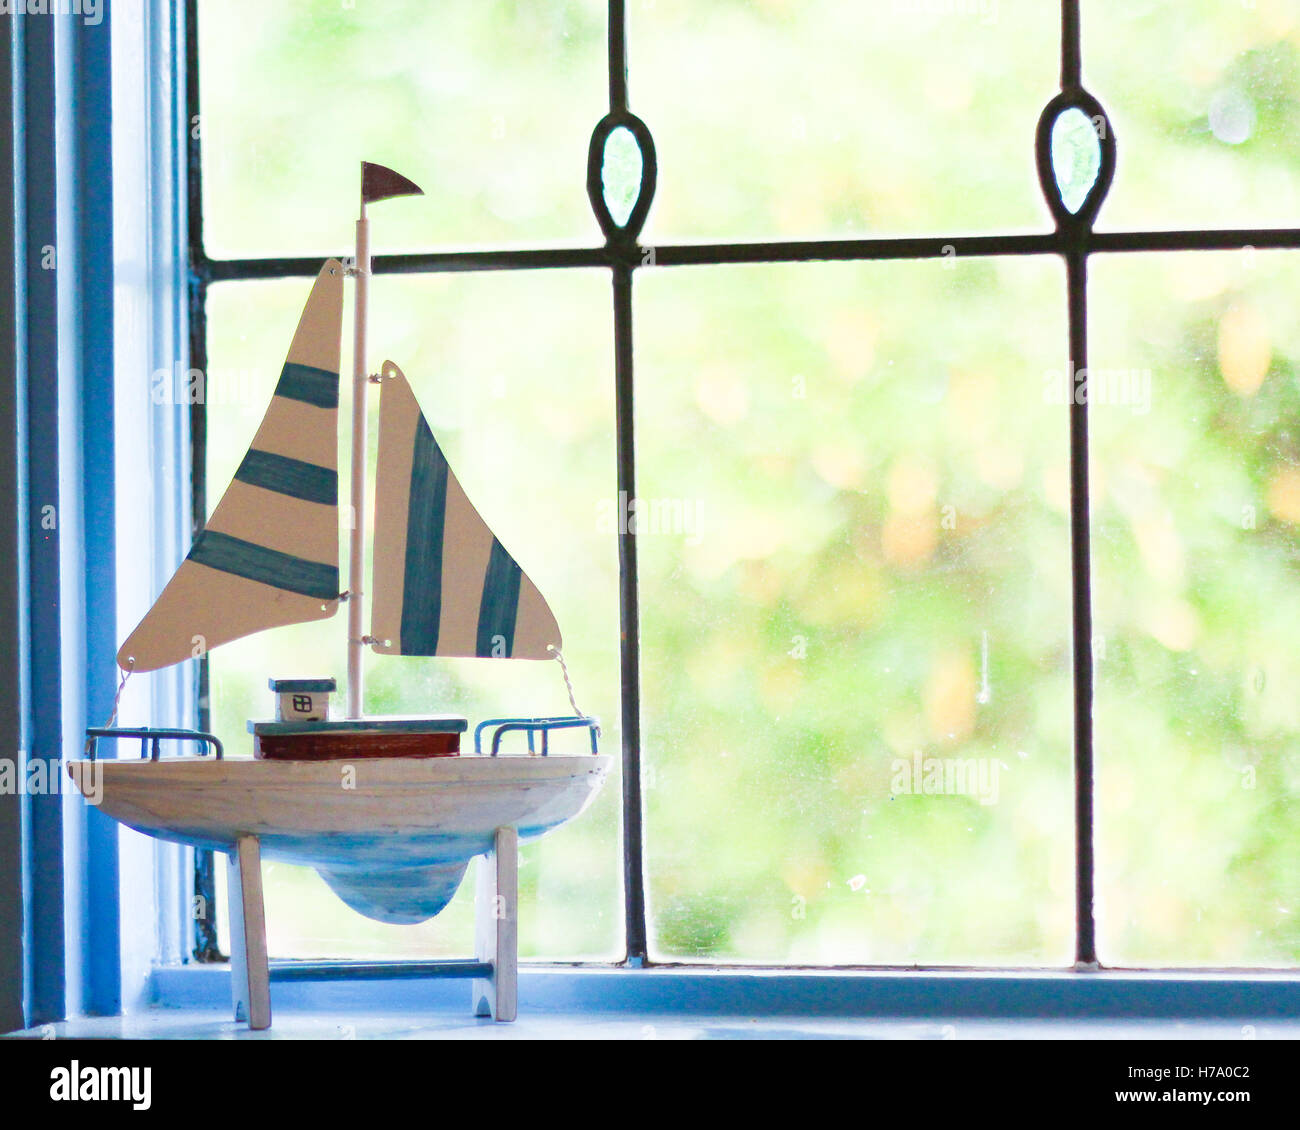 Sailboat ornament in front of lead light window in beach house Stock Photo